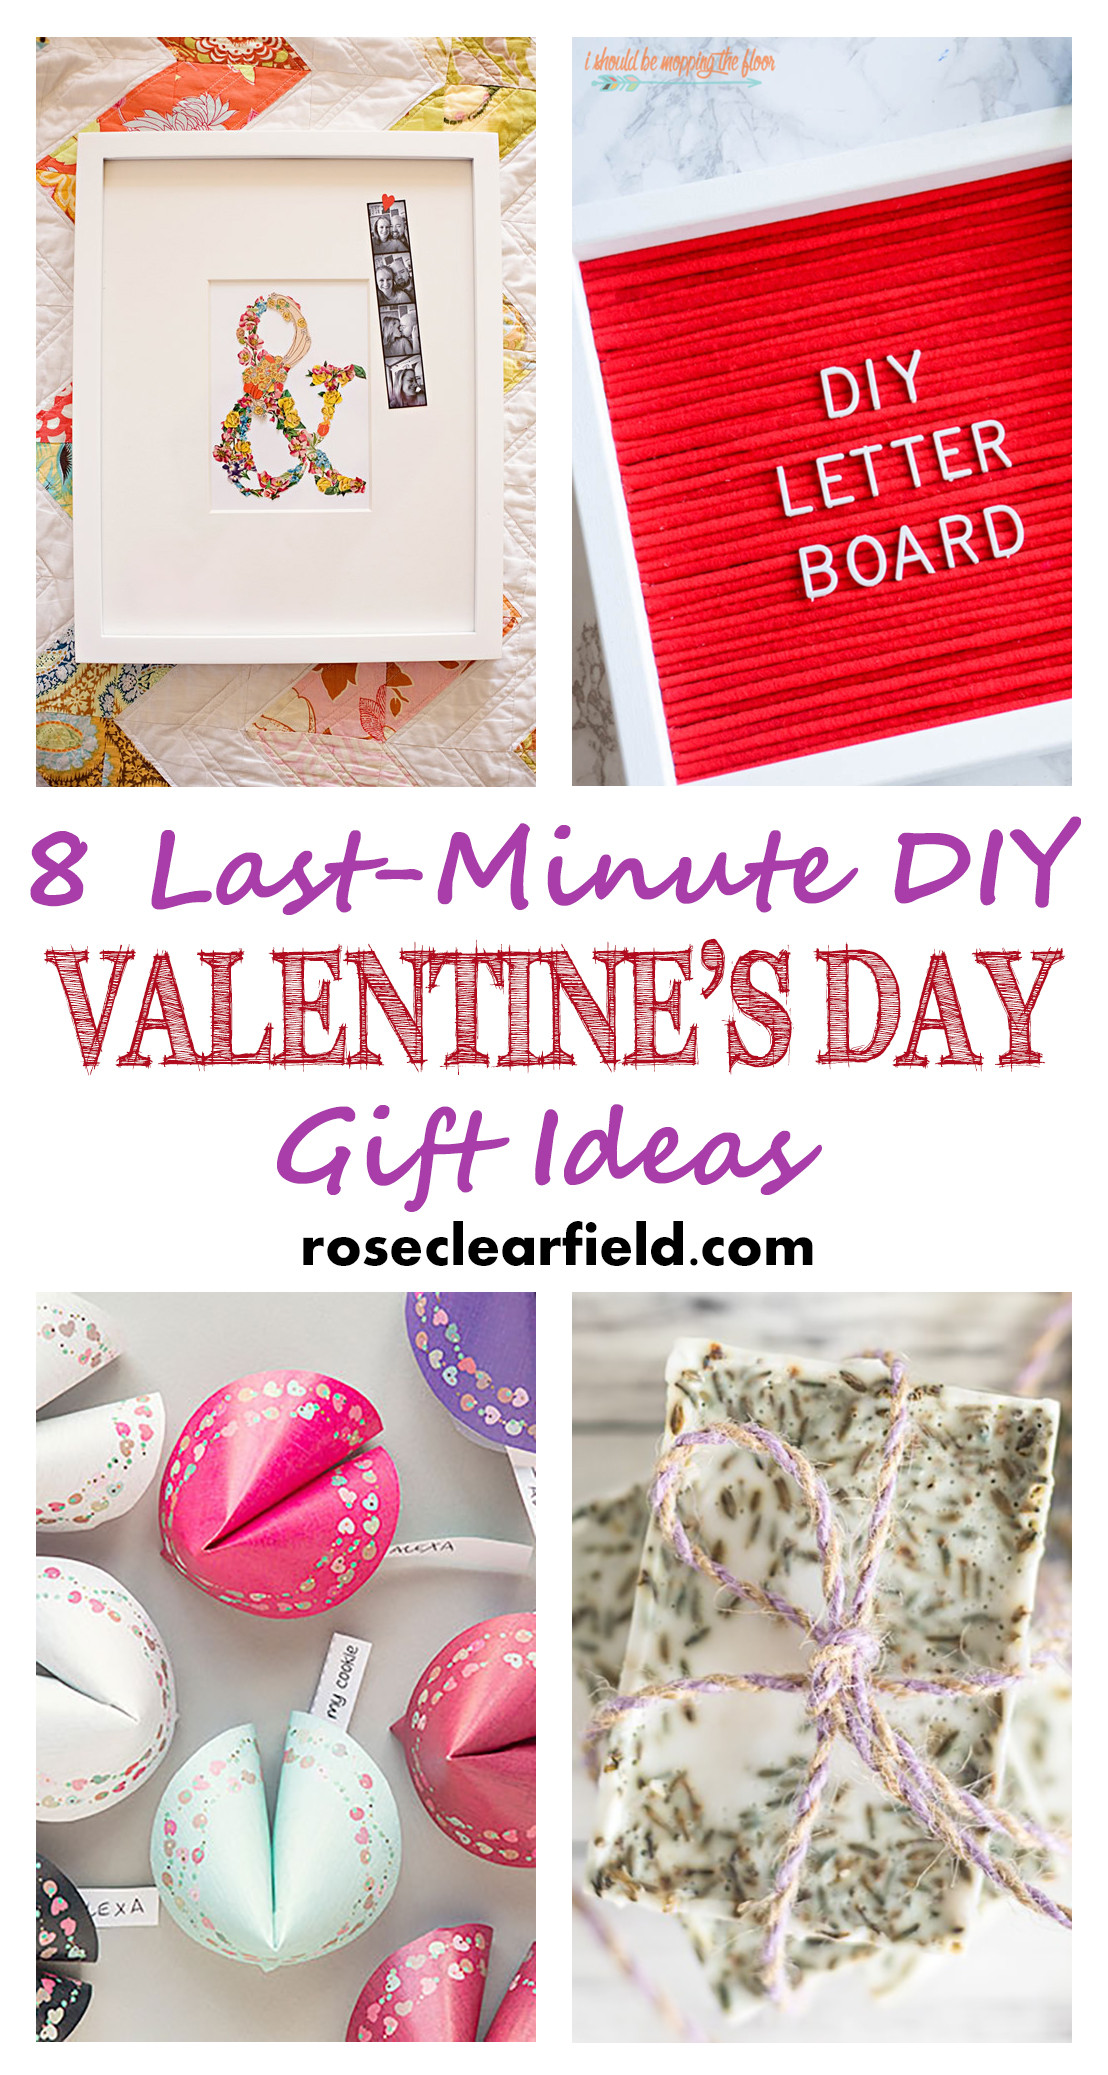 Last Minute DIY Gift Ideas
 Last Minute DIY Valentine s Day Gift Ideas • Rose Clearfield